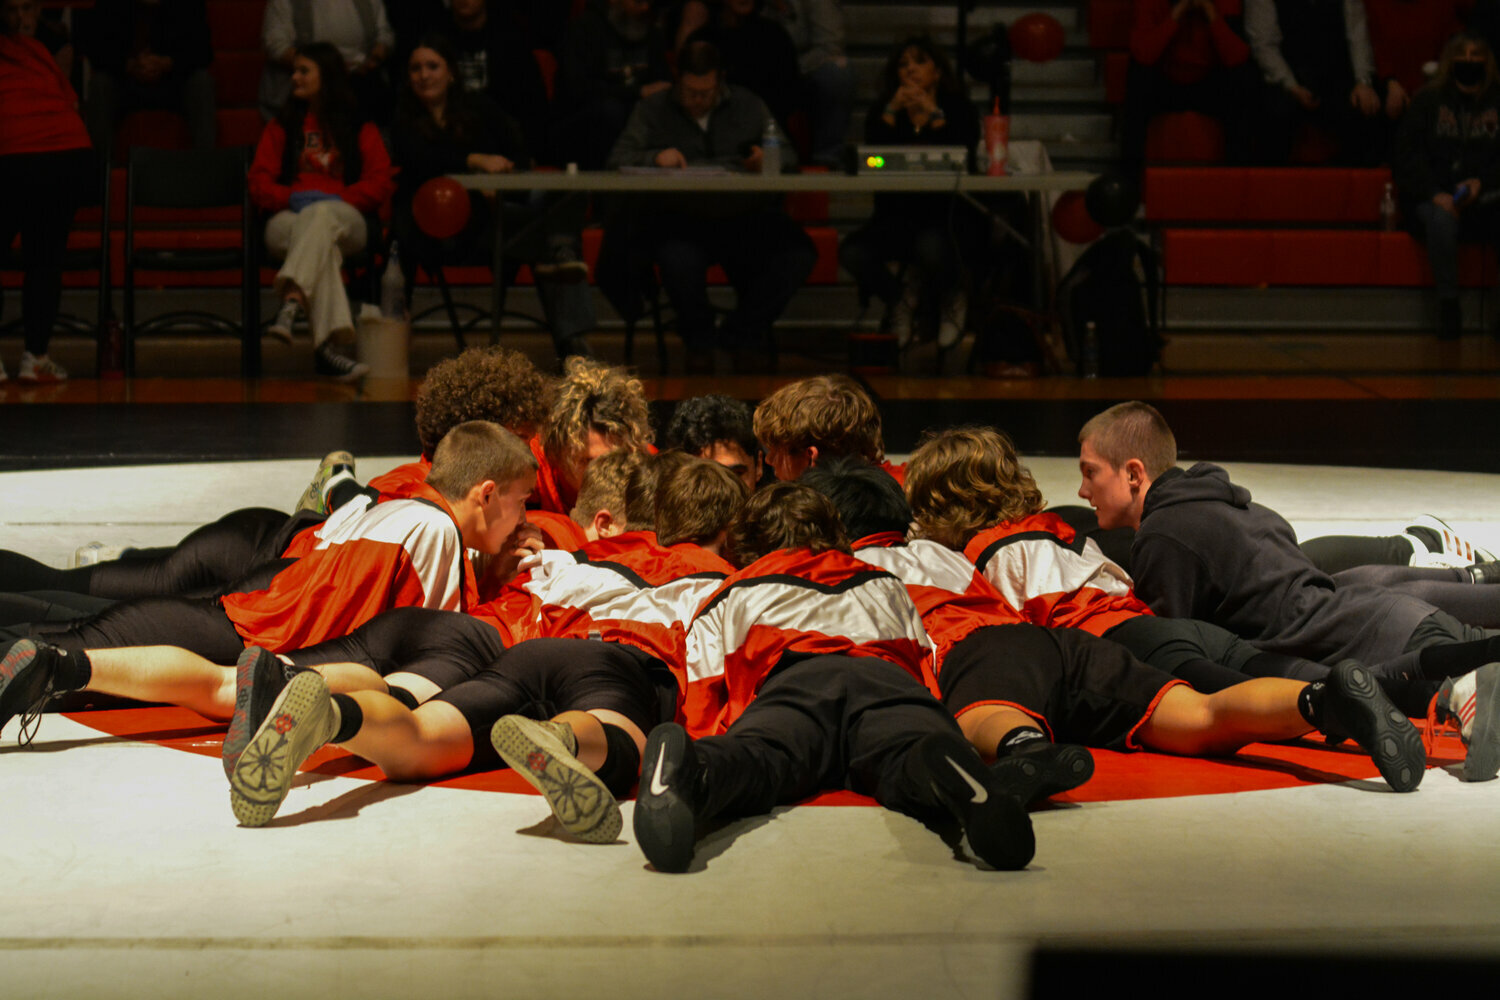 Yelm’s boys wrestling team storms the mat on Jan. 23, prior to the team’s “Bad to the Bone” dual against Bethel High School. The Tornados defeated the Bison, 37-36.